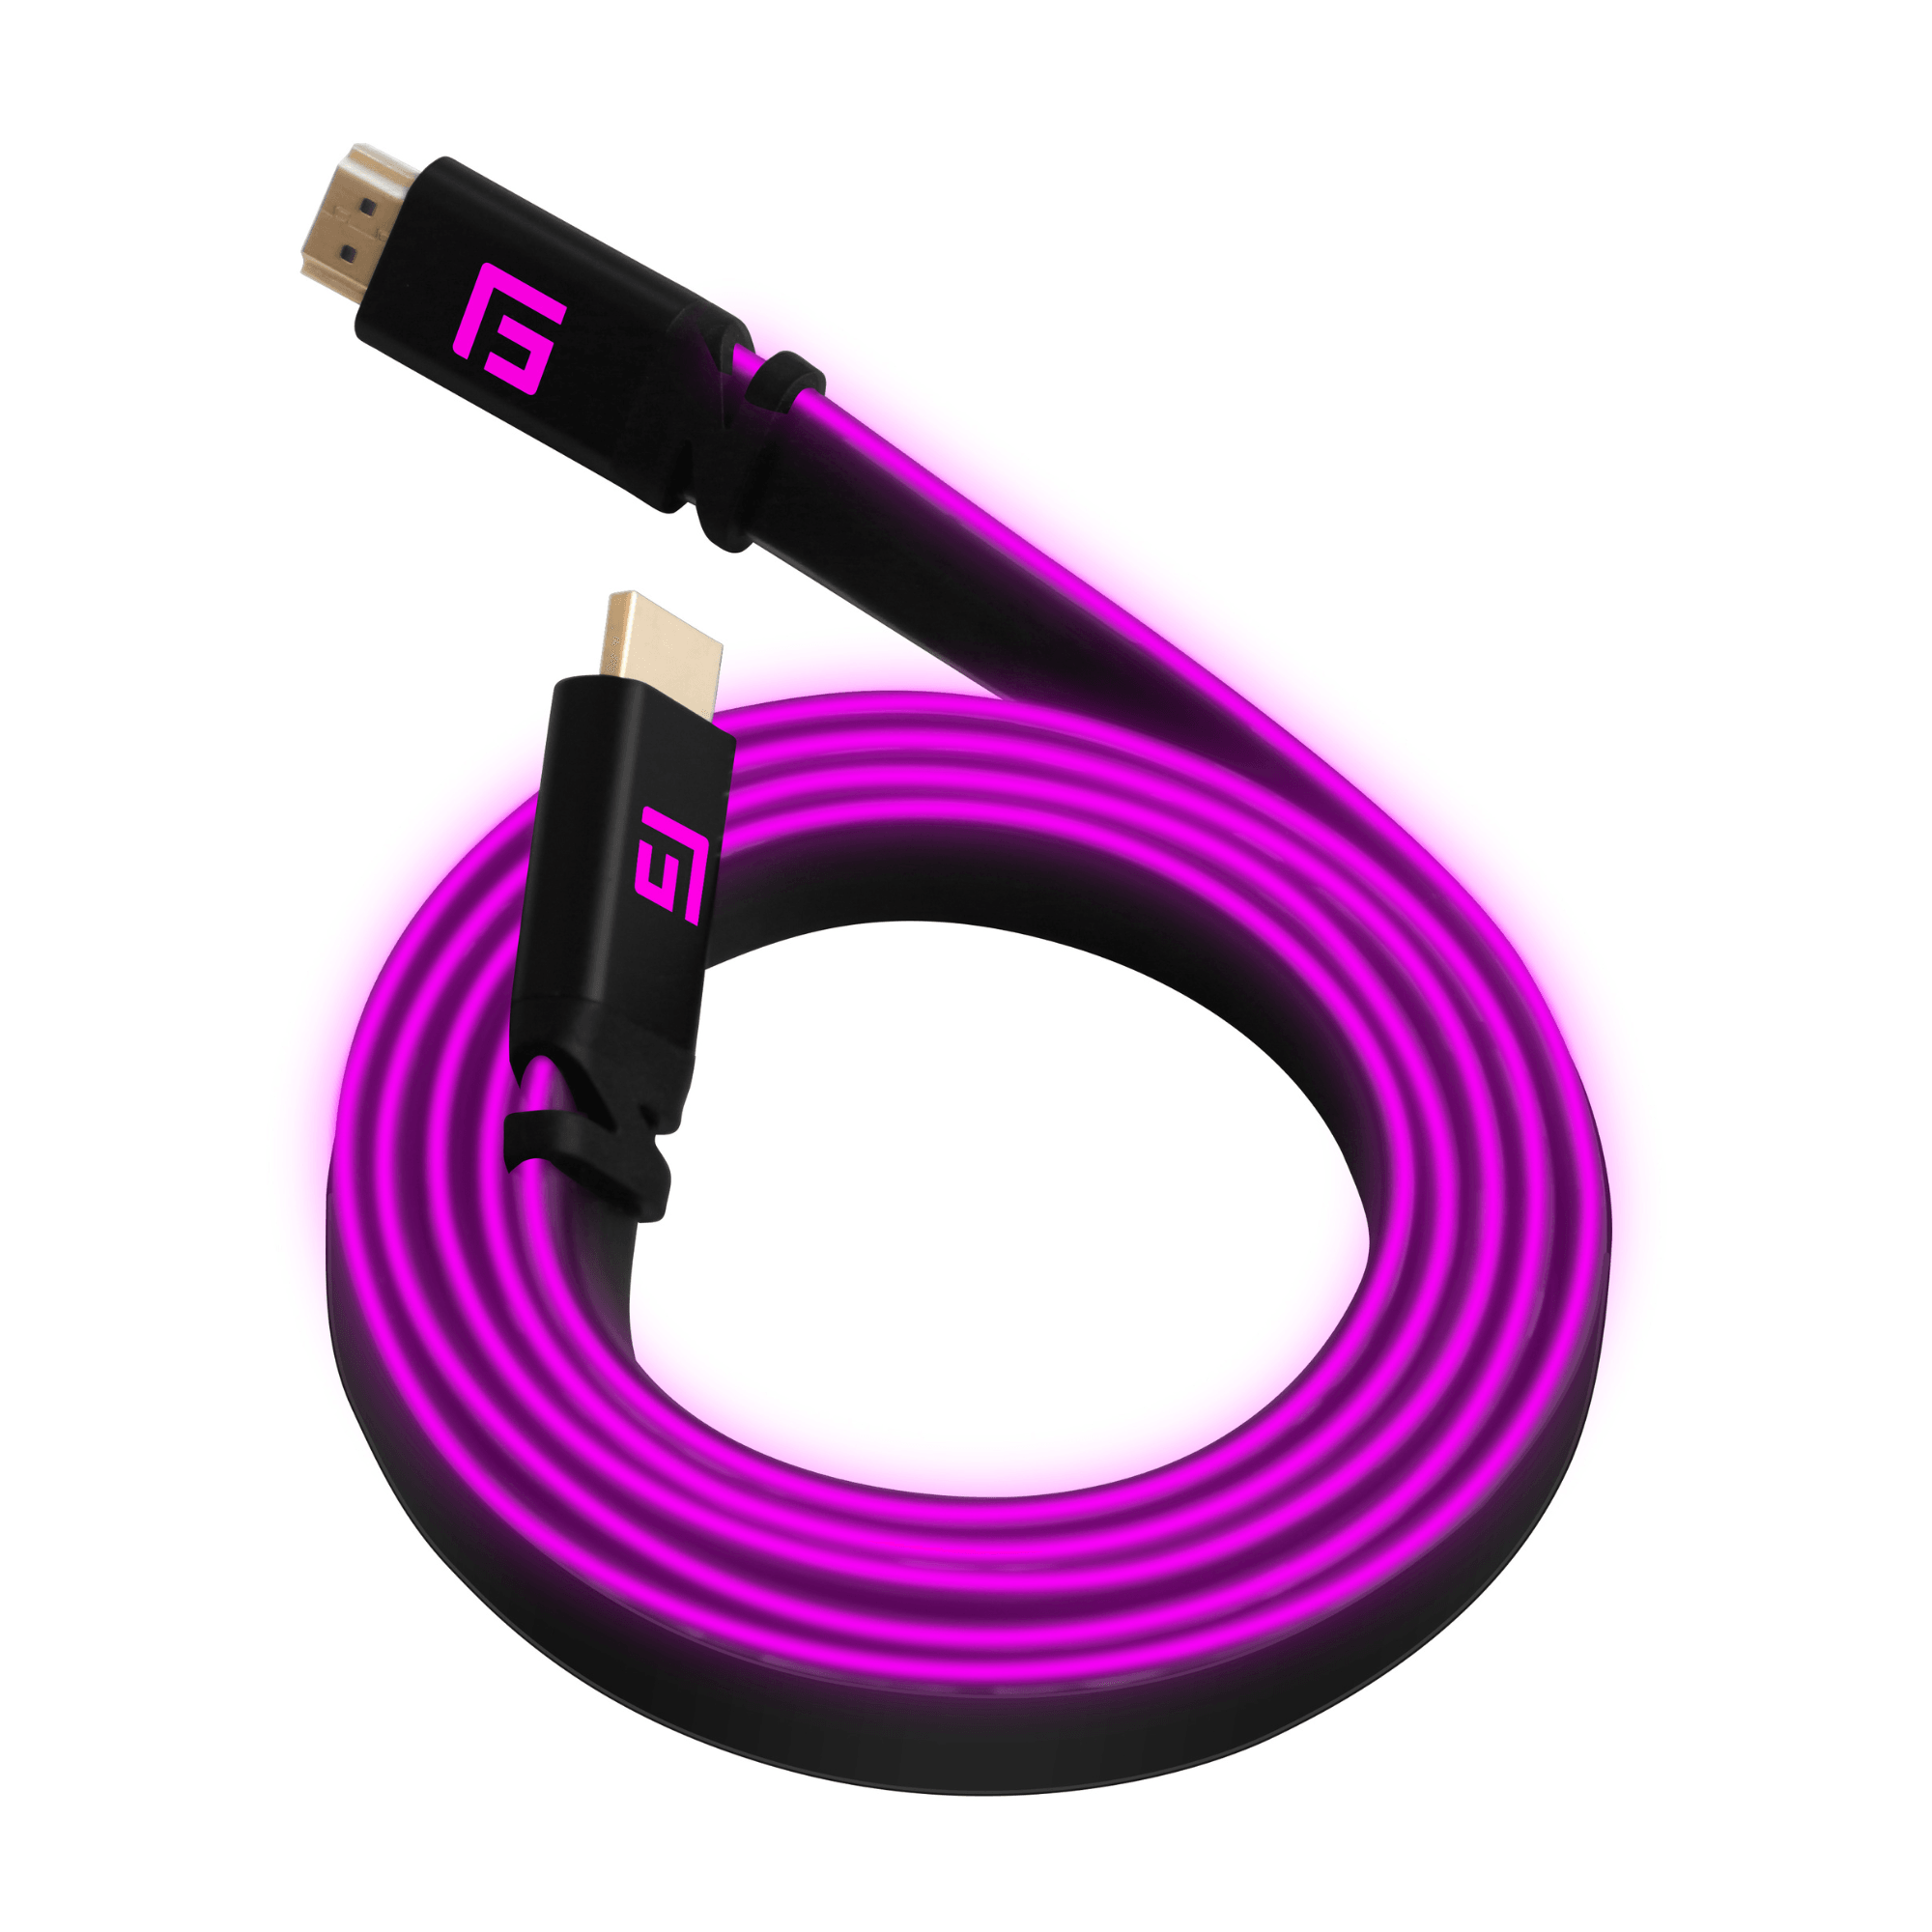 PDP - Afterglow - Cable HDMI Double 1.80 M - PURPLE/RED -  0708056090203 - PDP - Cable - 19.99€